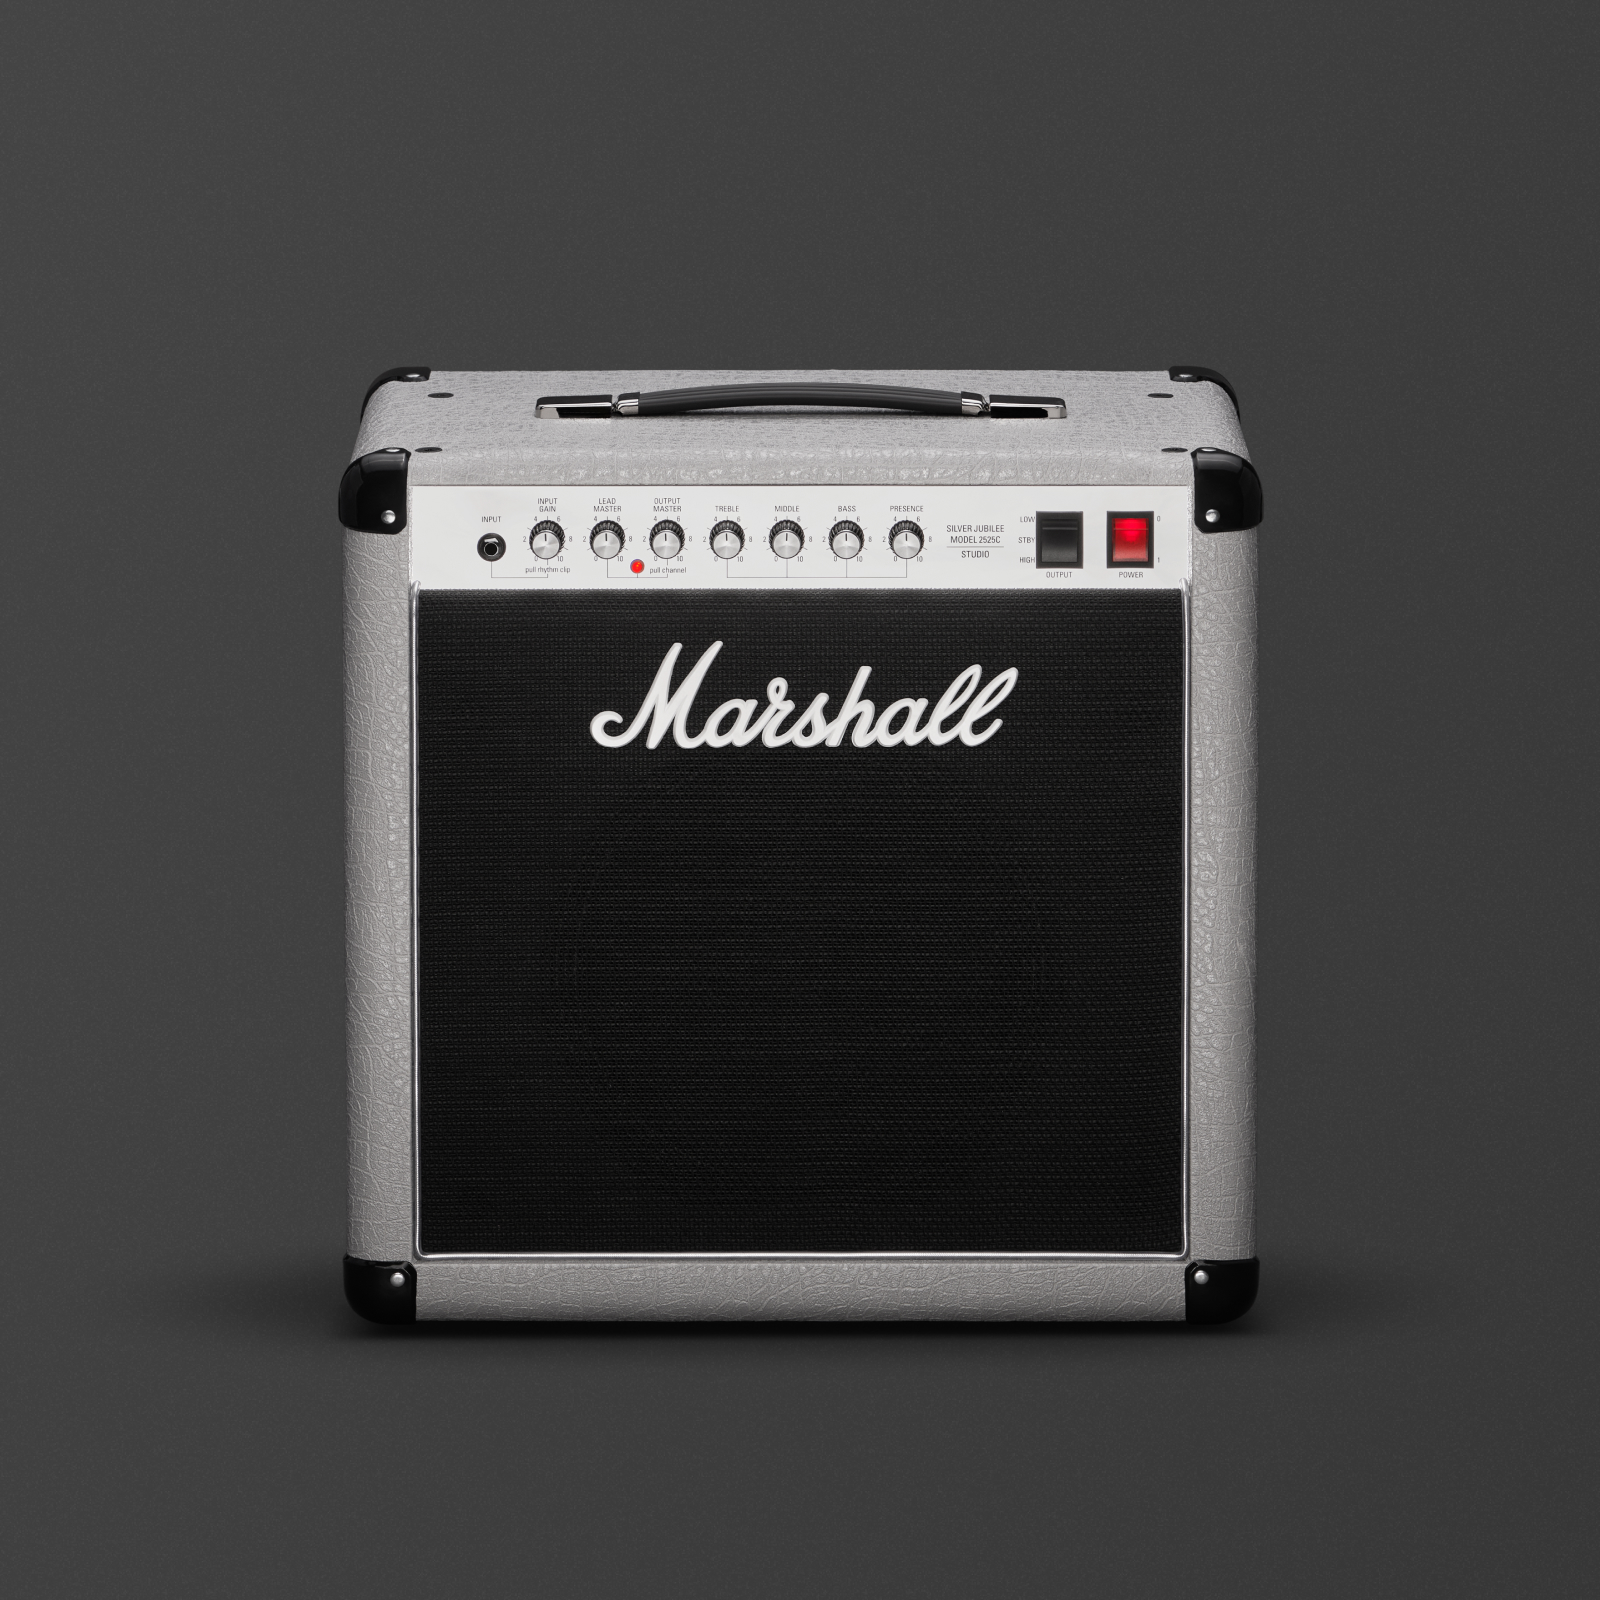 Marshall 2525c in black and silver